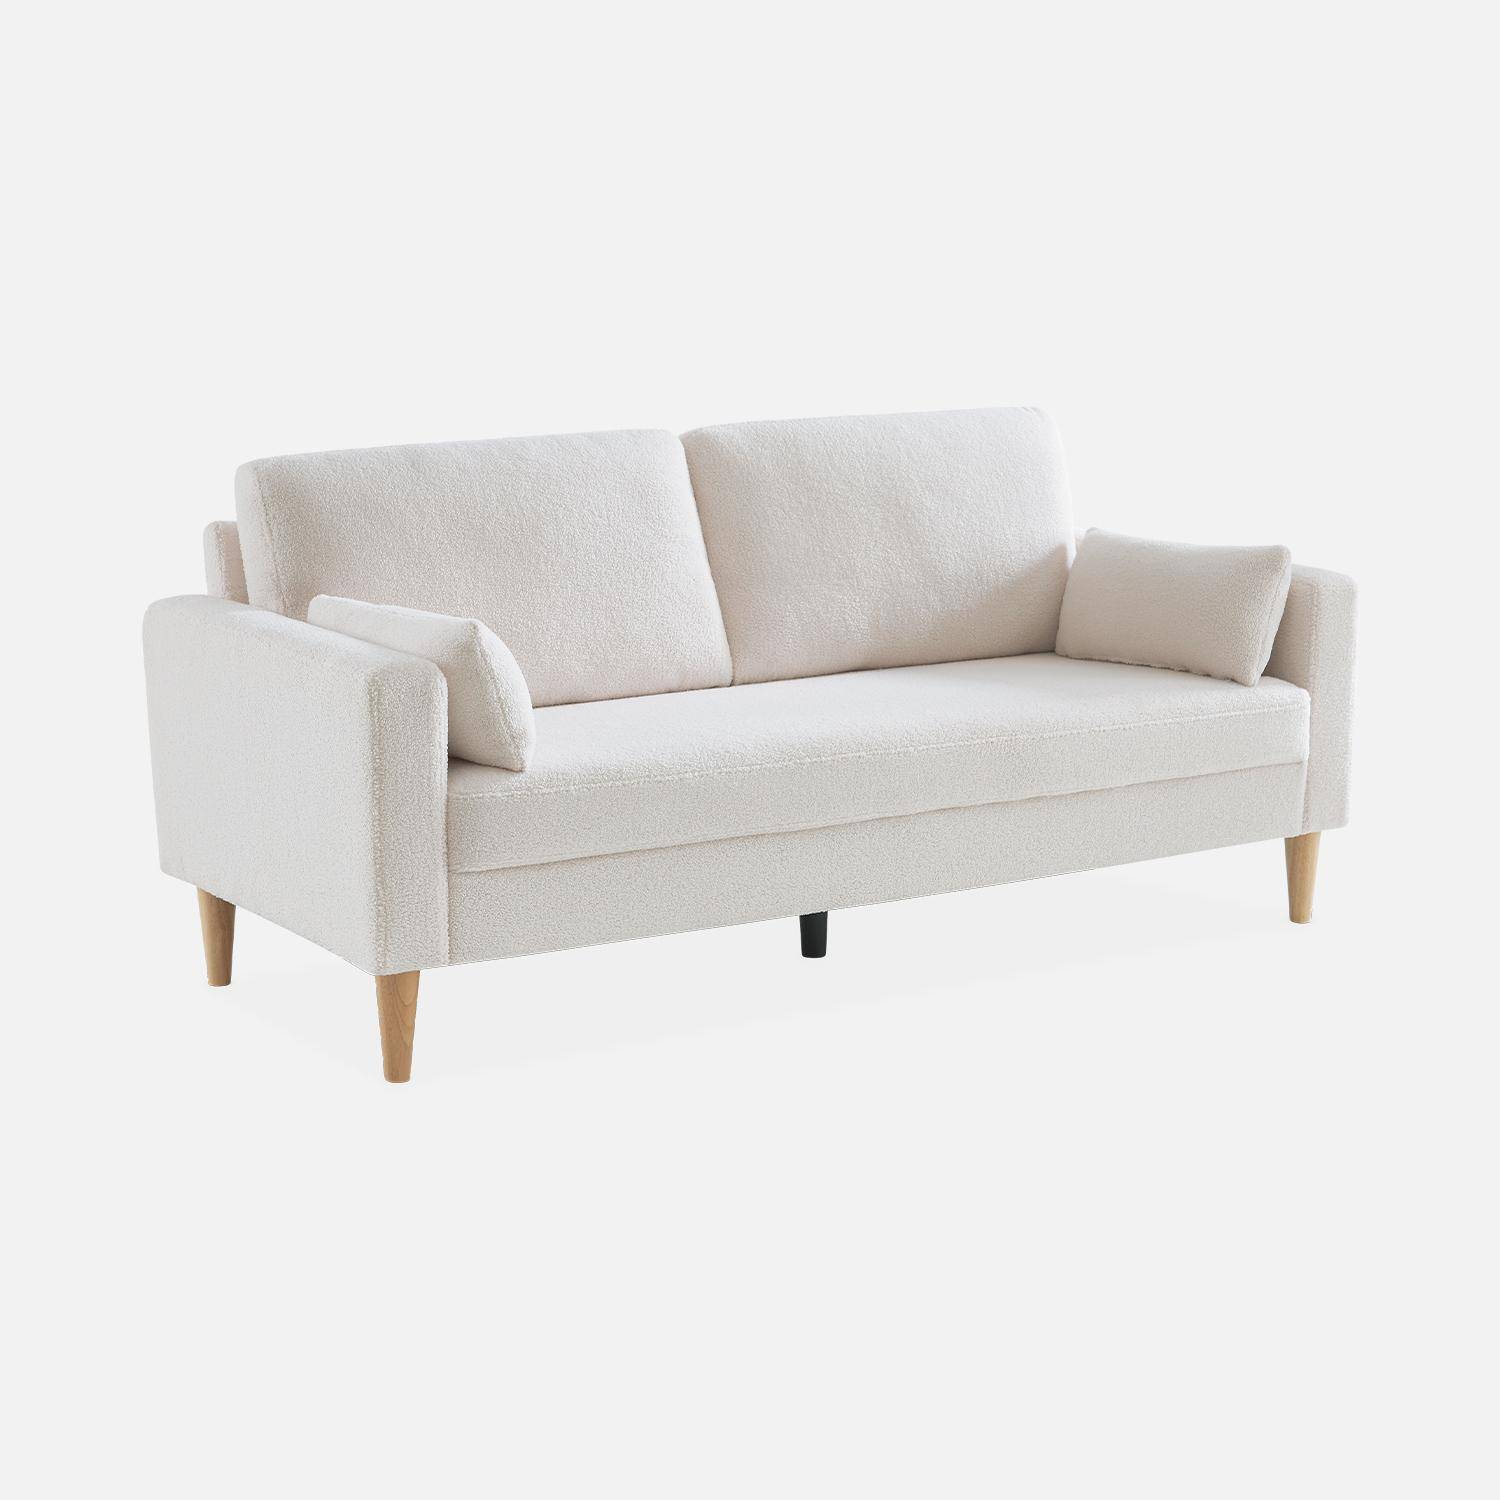 Large 3-seater sofa Scandi-style with wooden legs - Bjorn - white boucle Photo3